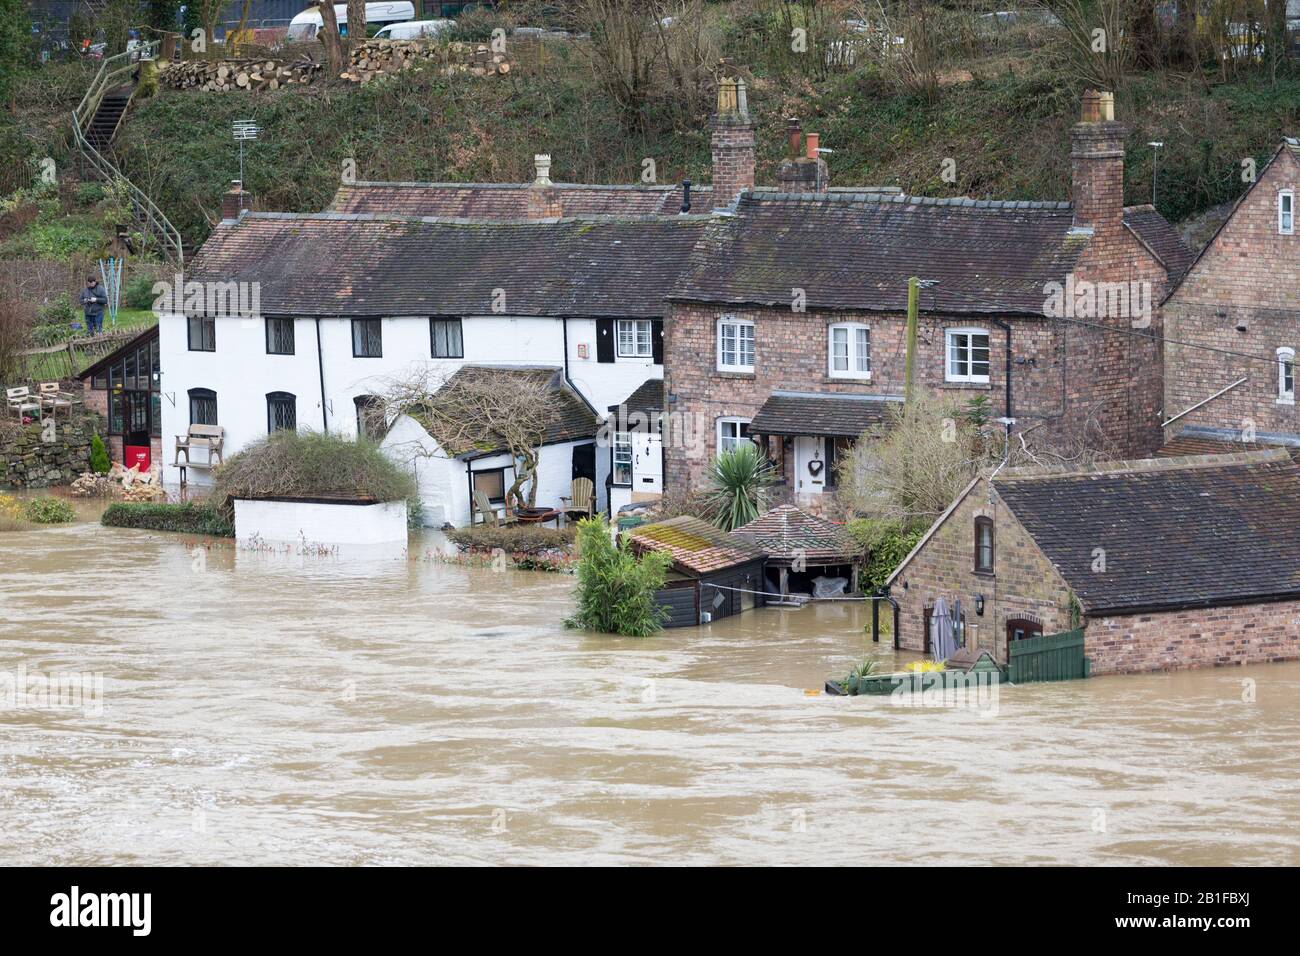 Ironbridge, Shropshire, UK. 25th Feb, 2020. Severe flood warning in place on the River Severn at Ironbridge, Shropshire. A house on the riverside is in danger of flooding as river levels continue to rise. Credit: Peter Lopeman/Alamy Live News Stock Photo